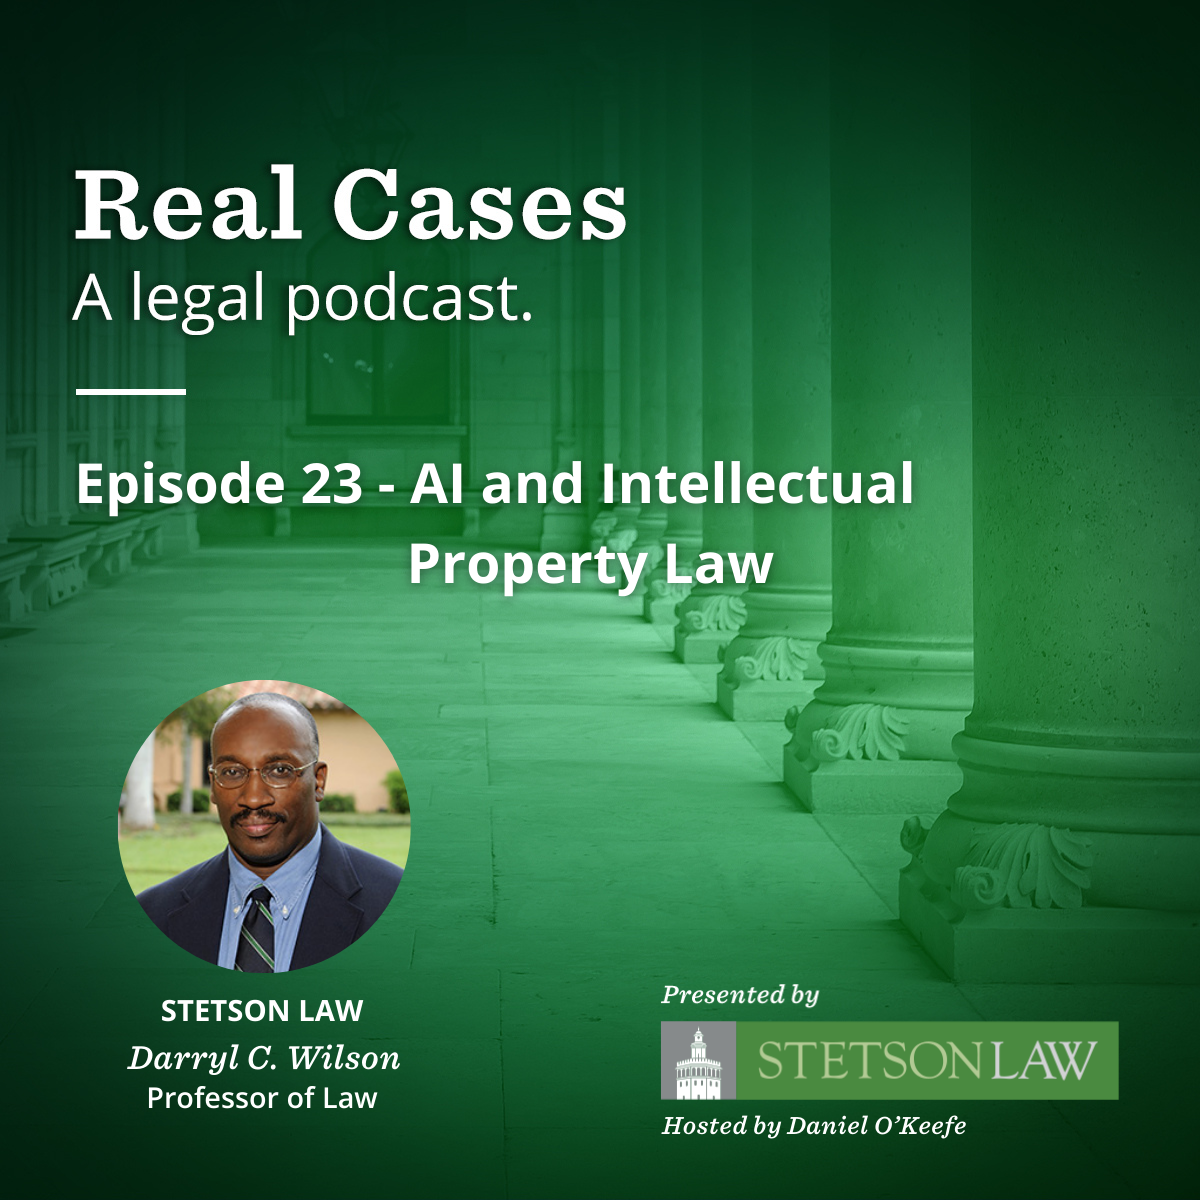 Real Cases - a legal podcast. Episode 23: AI and Intellectual Property Law - Daryl C. Wilson